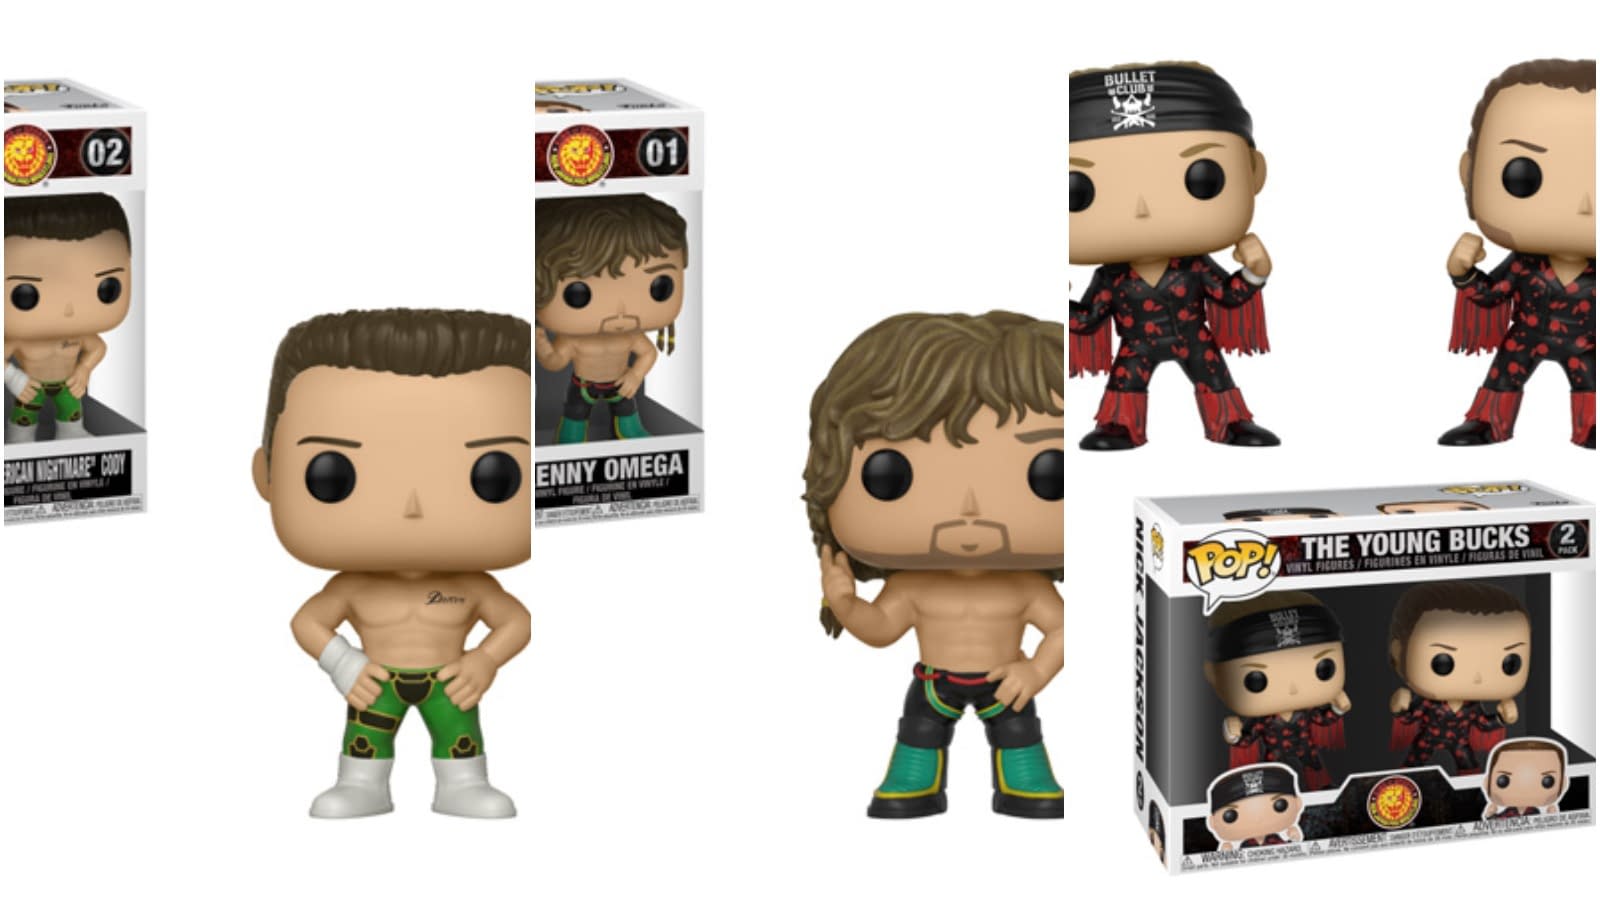 Bullet Club Gets the First Non-WWE Funko Pops in August